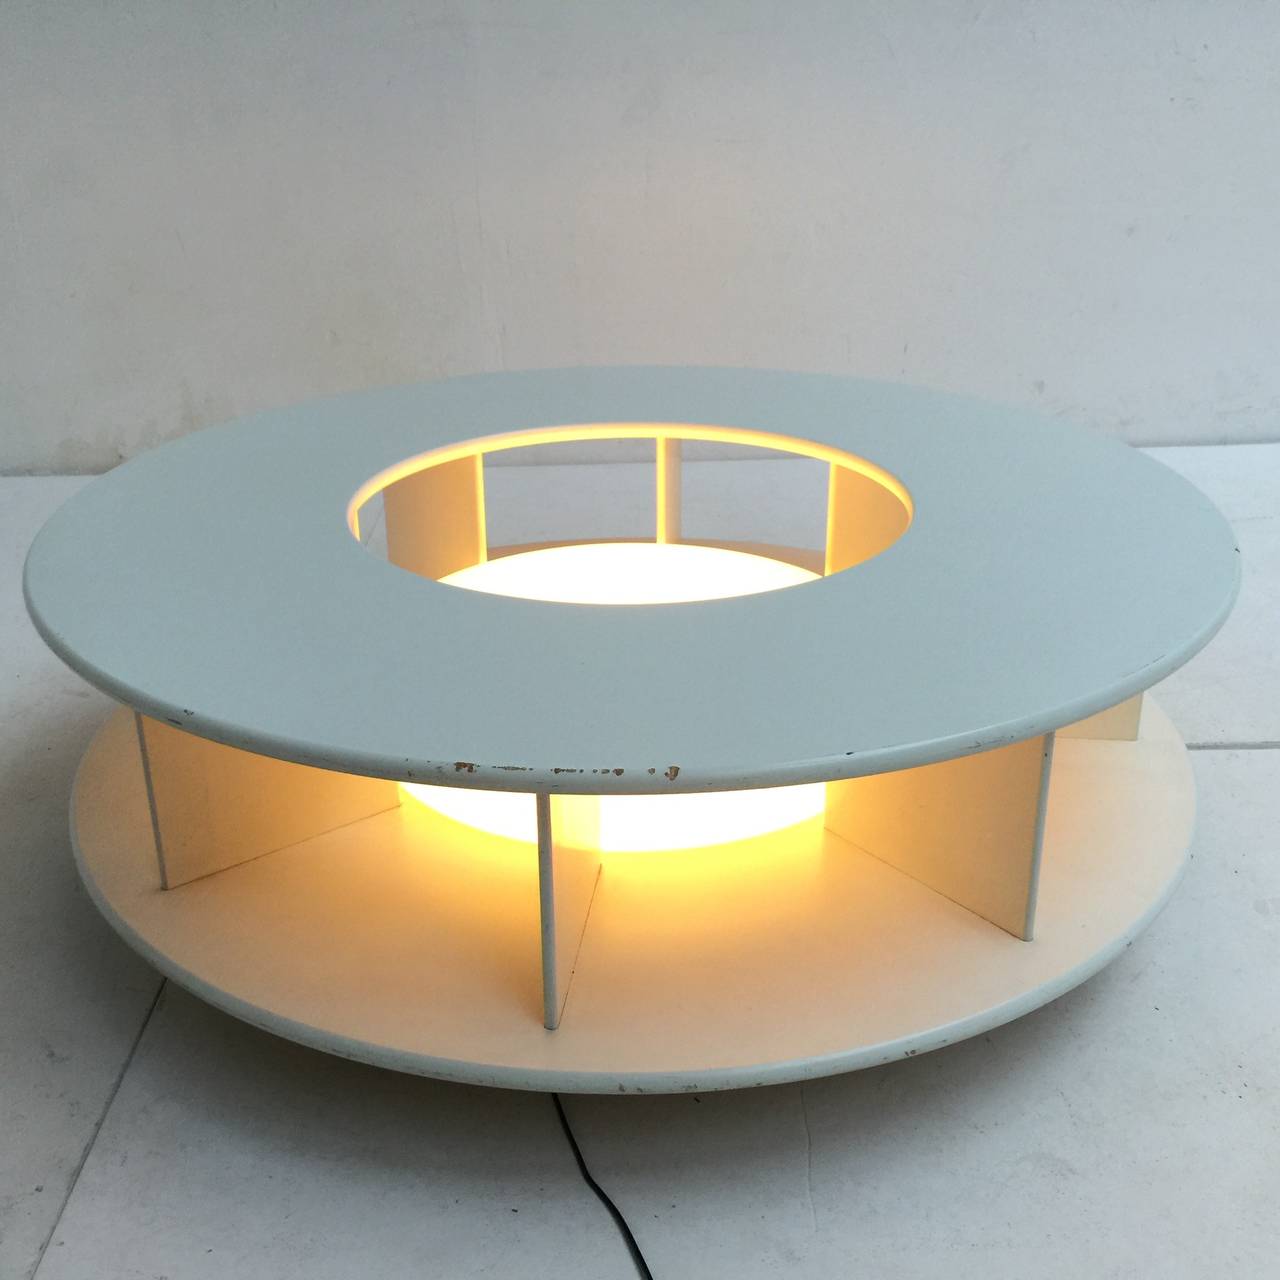 Rare ,beautiful illuminated and revolving 'Bazaar' sofa table designed by the famous radical Florentine architect's group 'Superstudio' in 1968. 

This table was originally designed to accompany the iconic radical Superstudio 'Bazaar' sofa and is